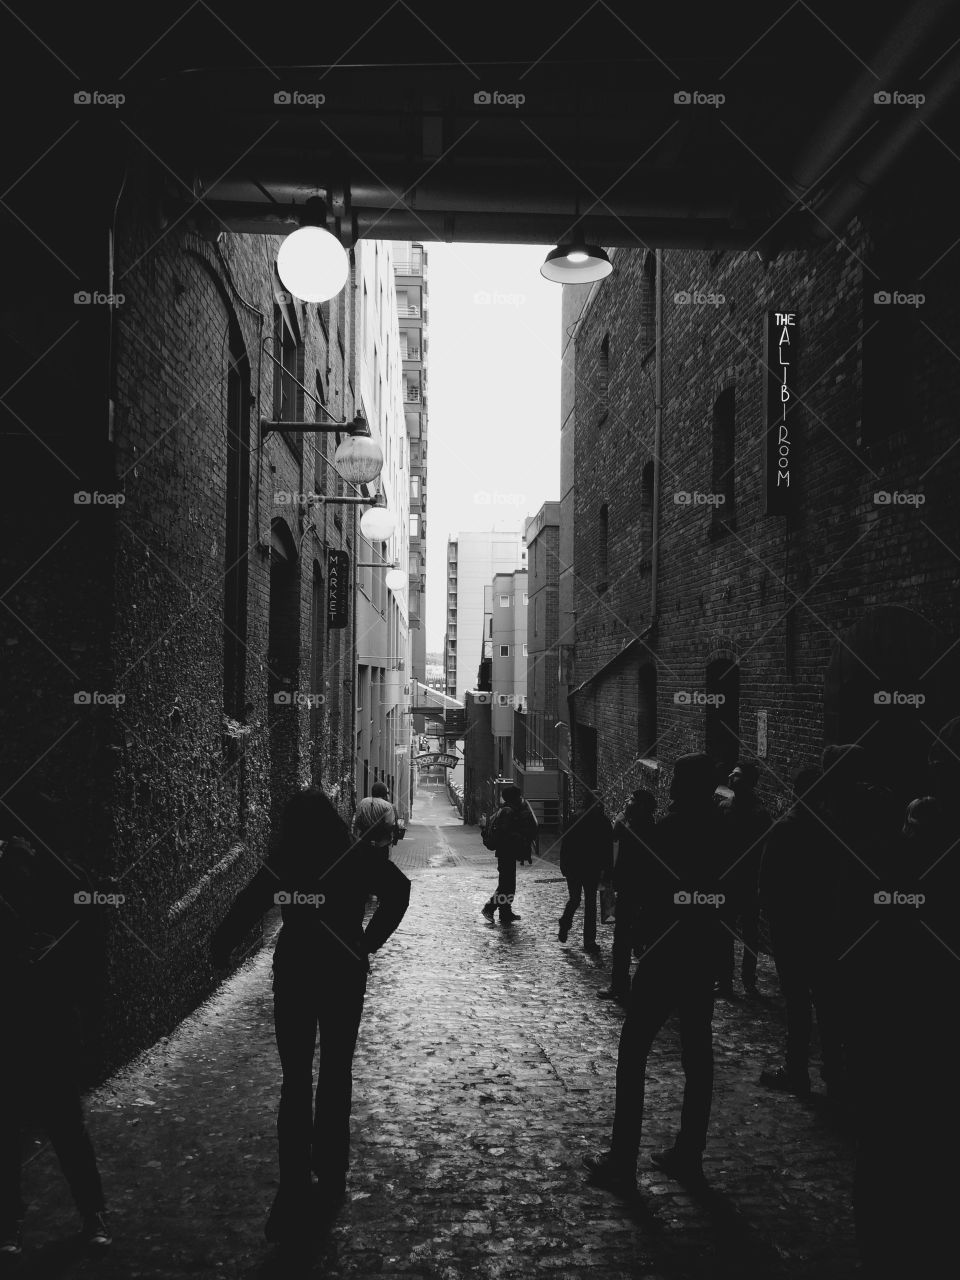 Be where you want to be. Black and white photo looking in on the gum wall street in Seattle, Washington